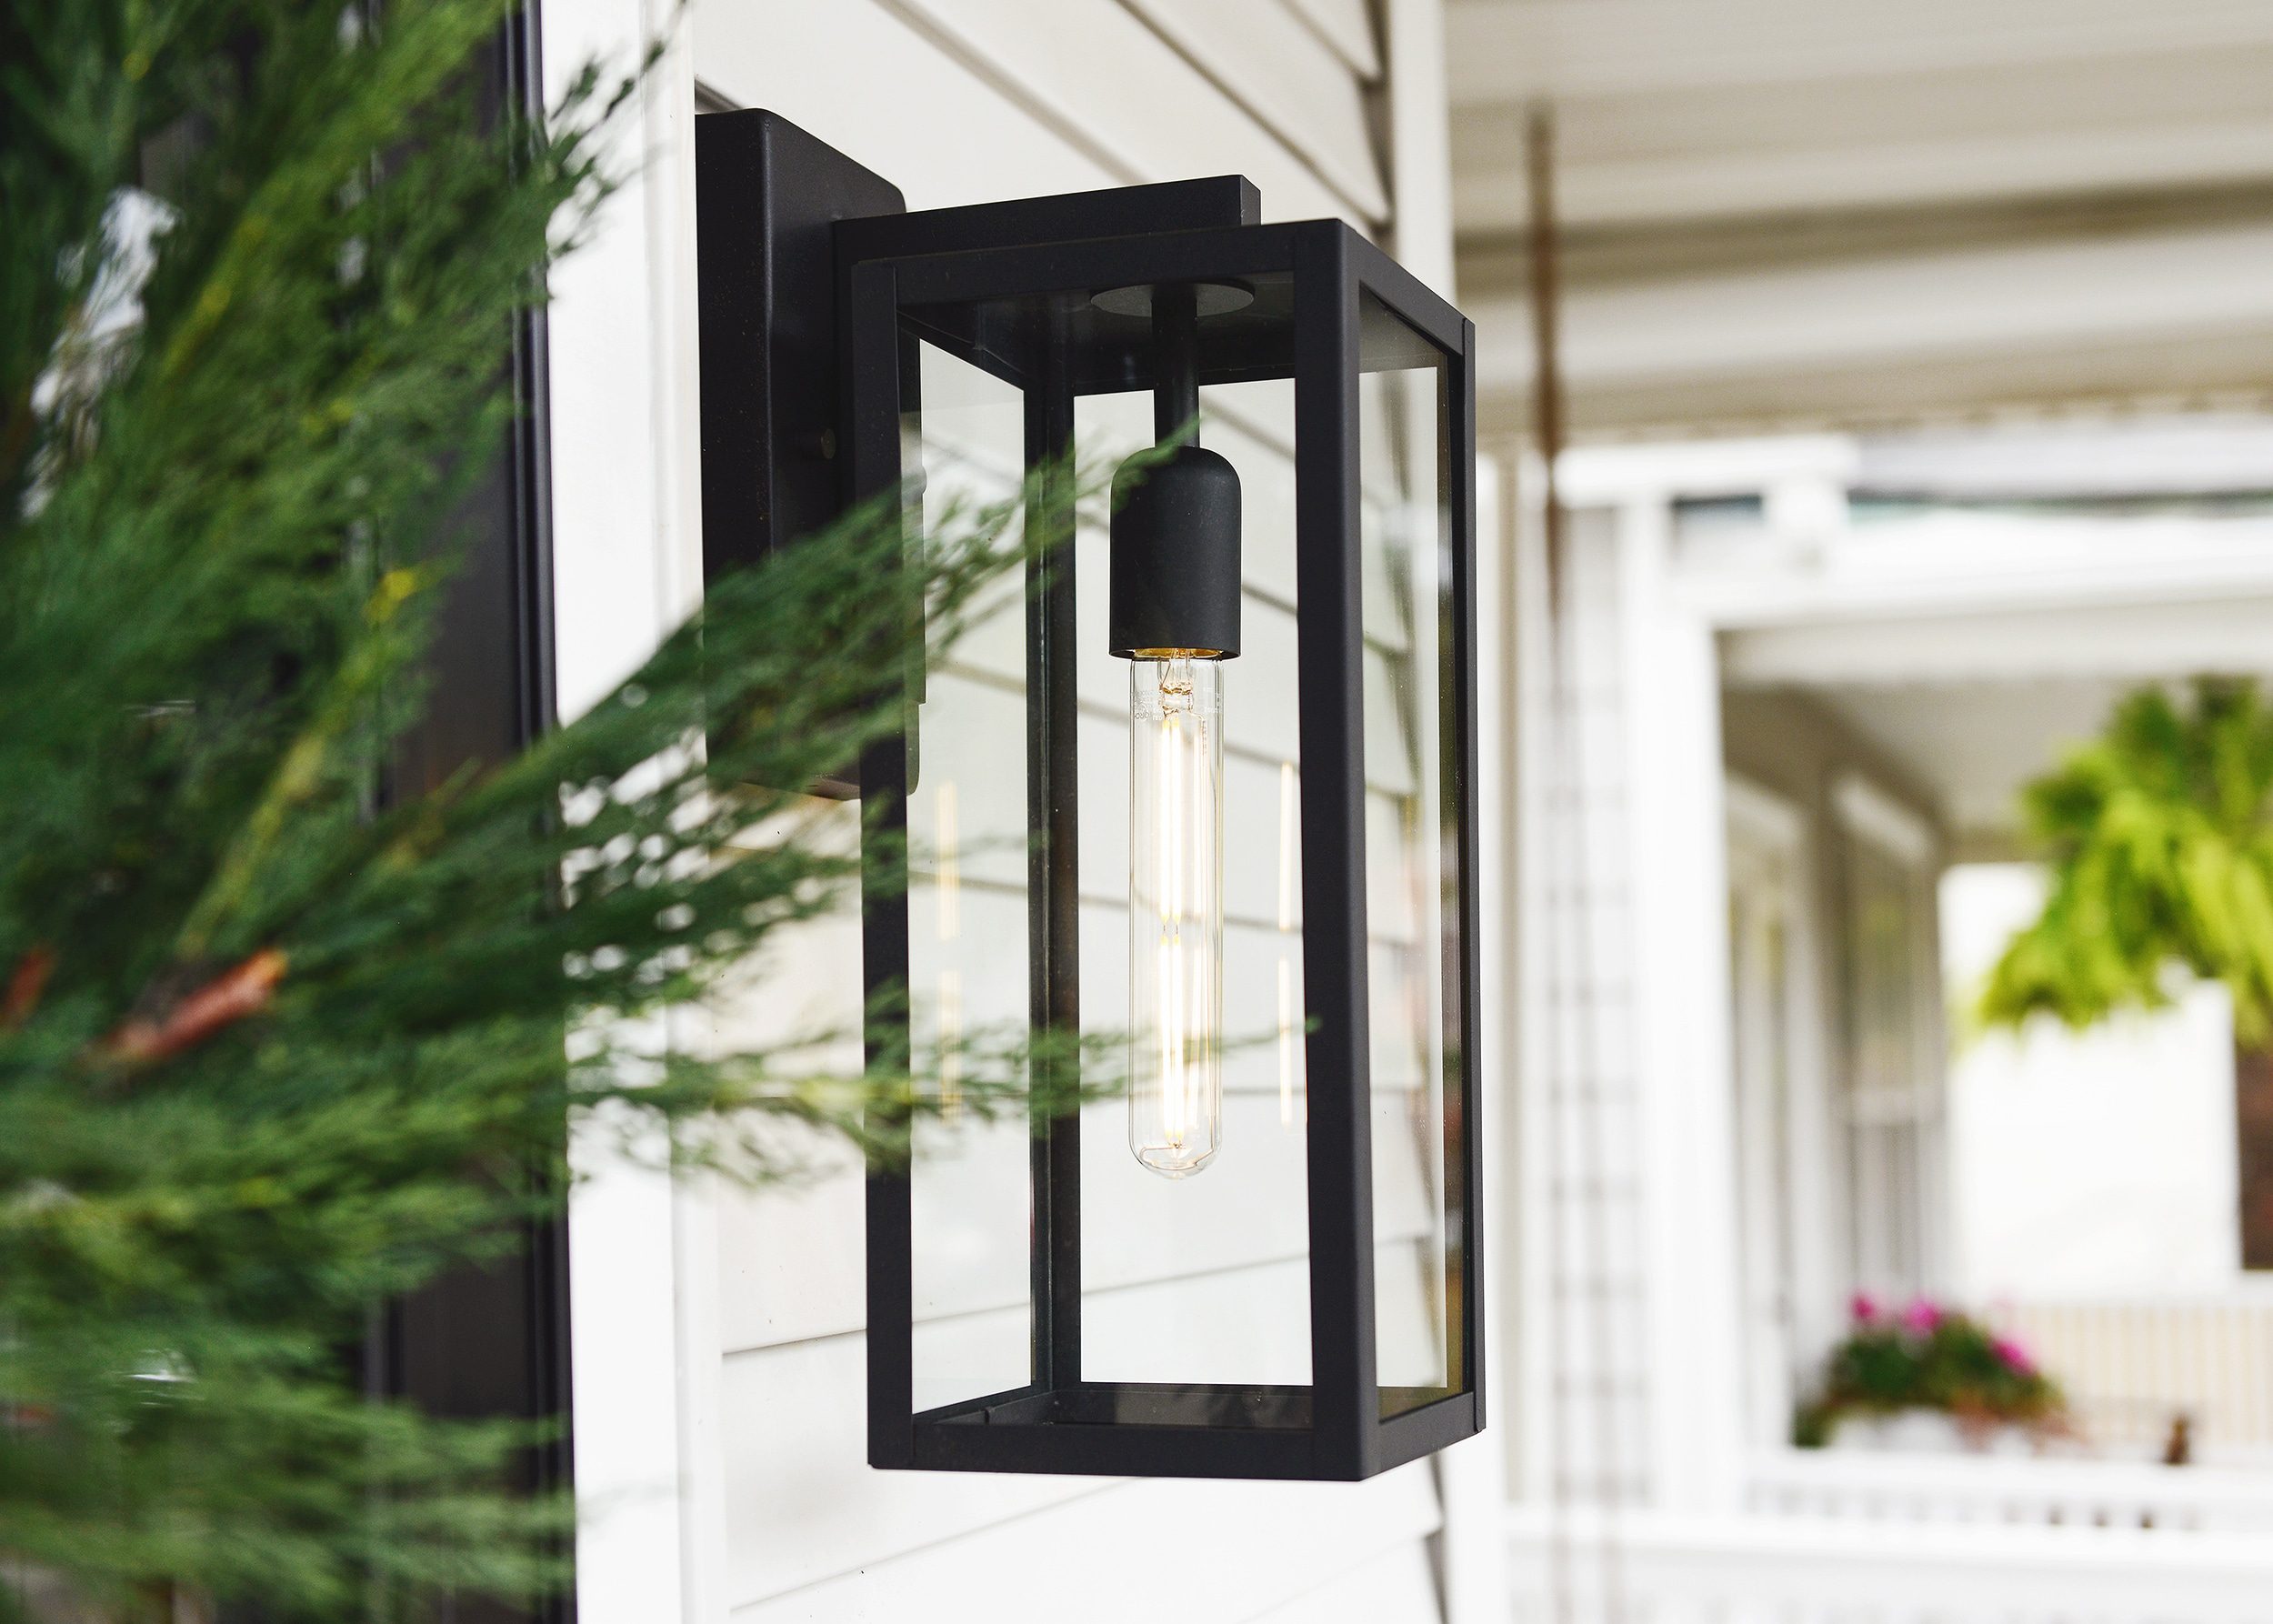 Affordable outdoor sconce, black metal and skinny LED: The 5 ingredients to a fall front porch refresh! via Yellow Brick Home